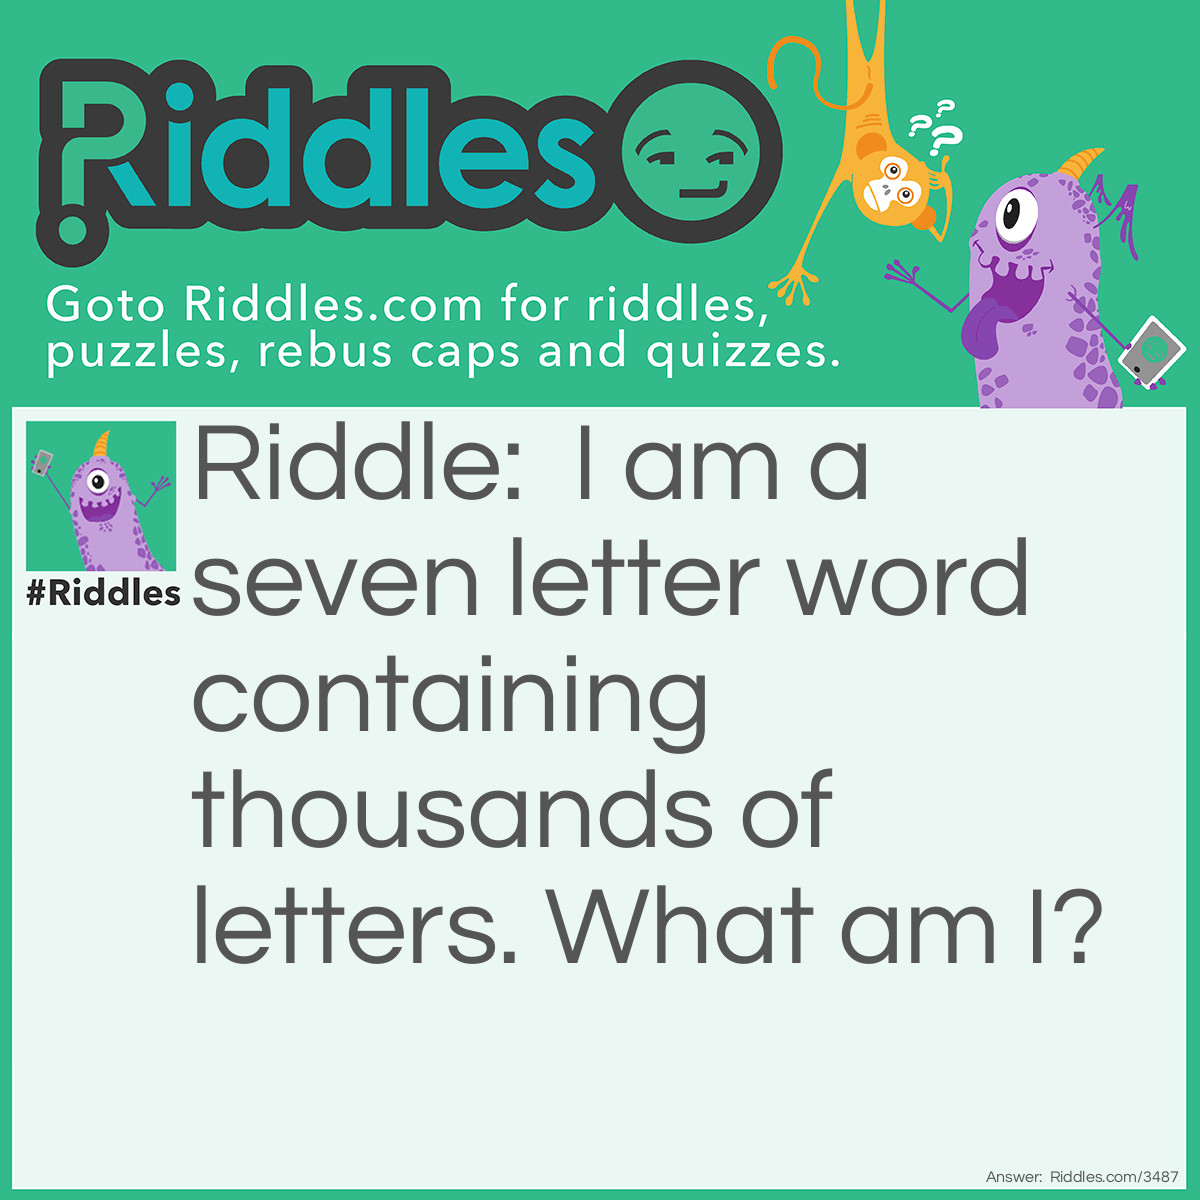 Riddle: A seven letter word containing thousands of letters. What am I? Answer: Mailbox.